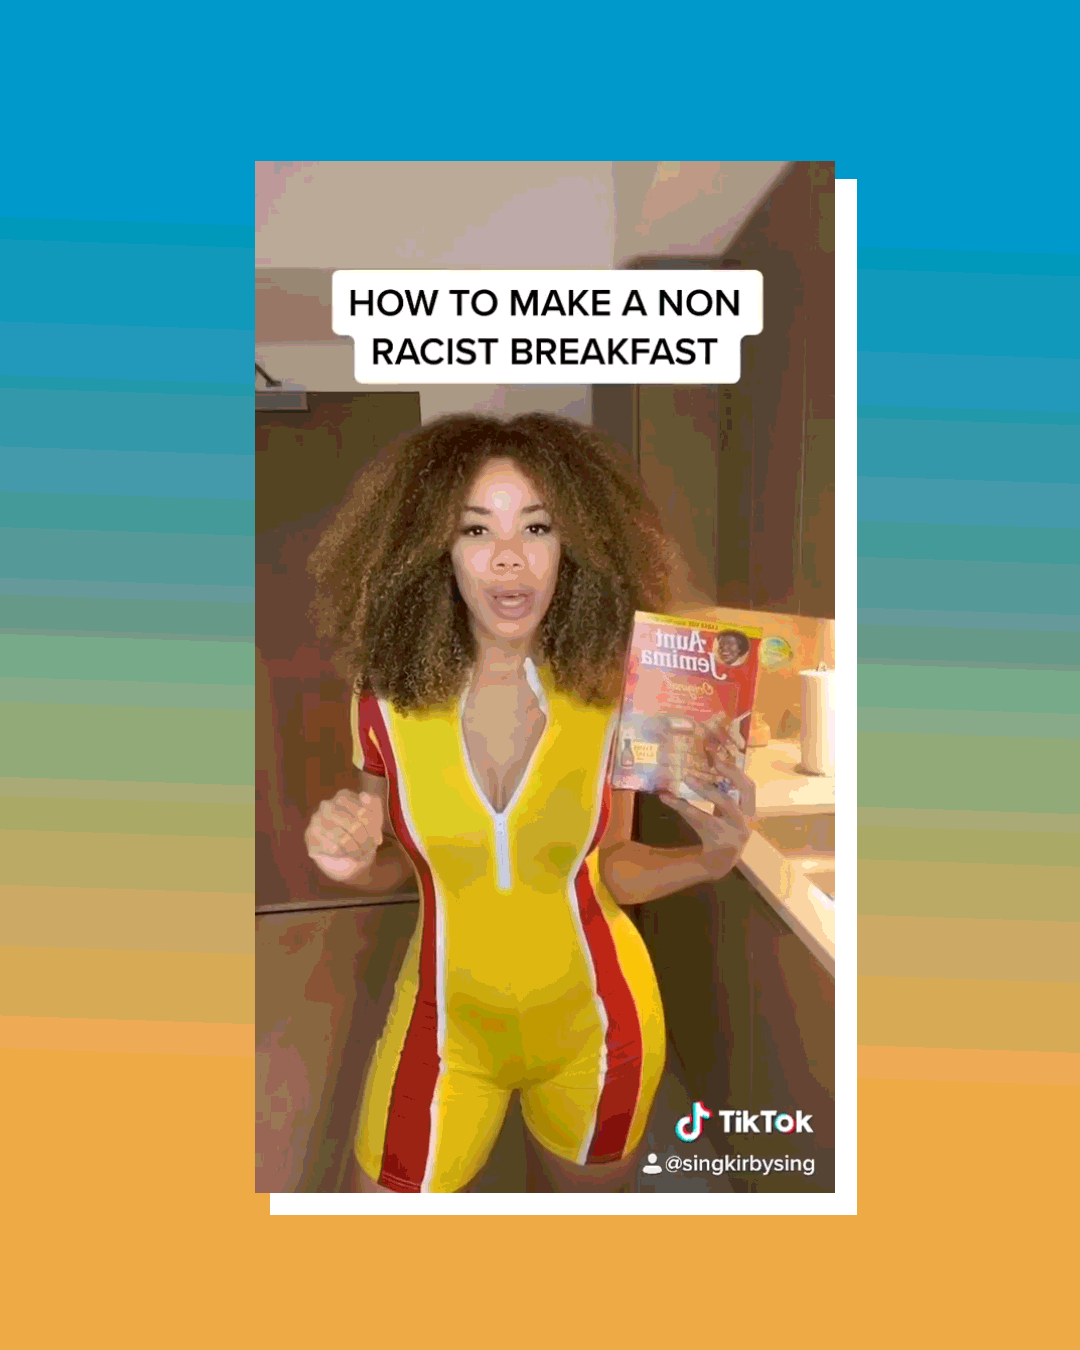 A woman holds an Aunt Jemima product under the words "How to make a non racist breakfast."